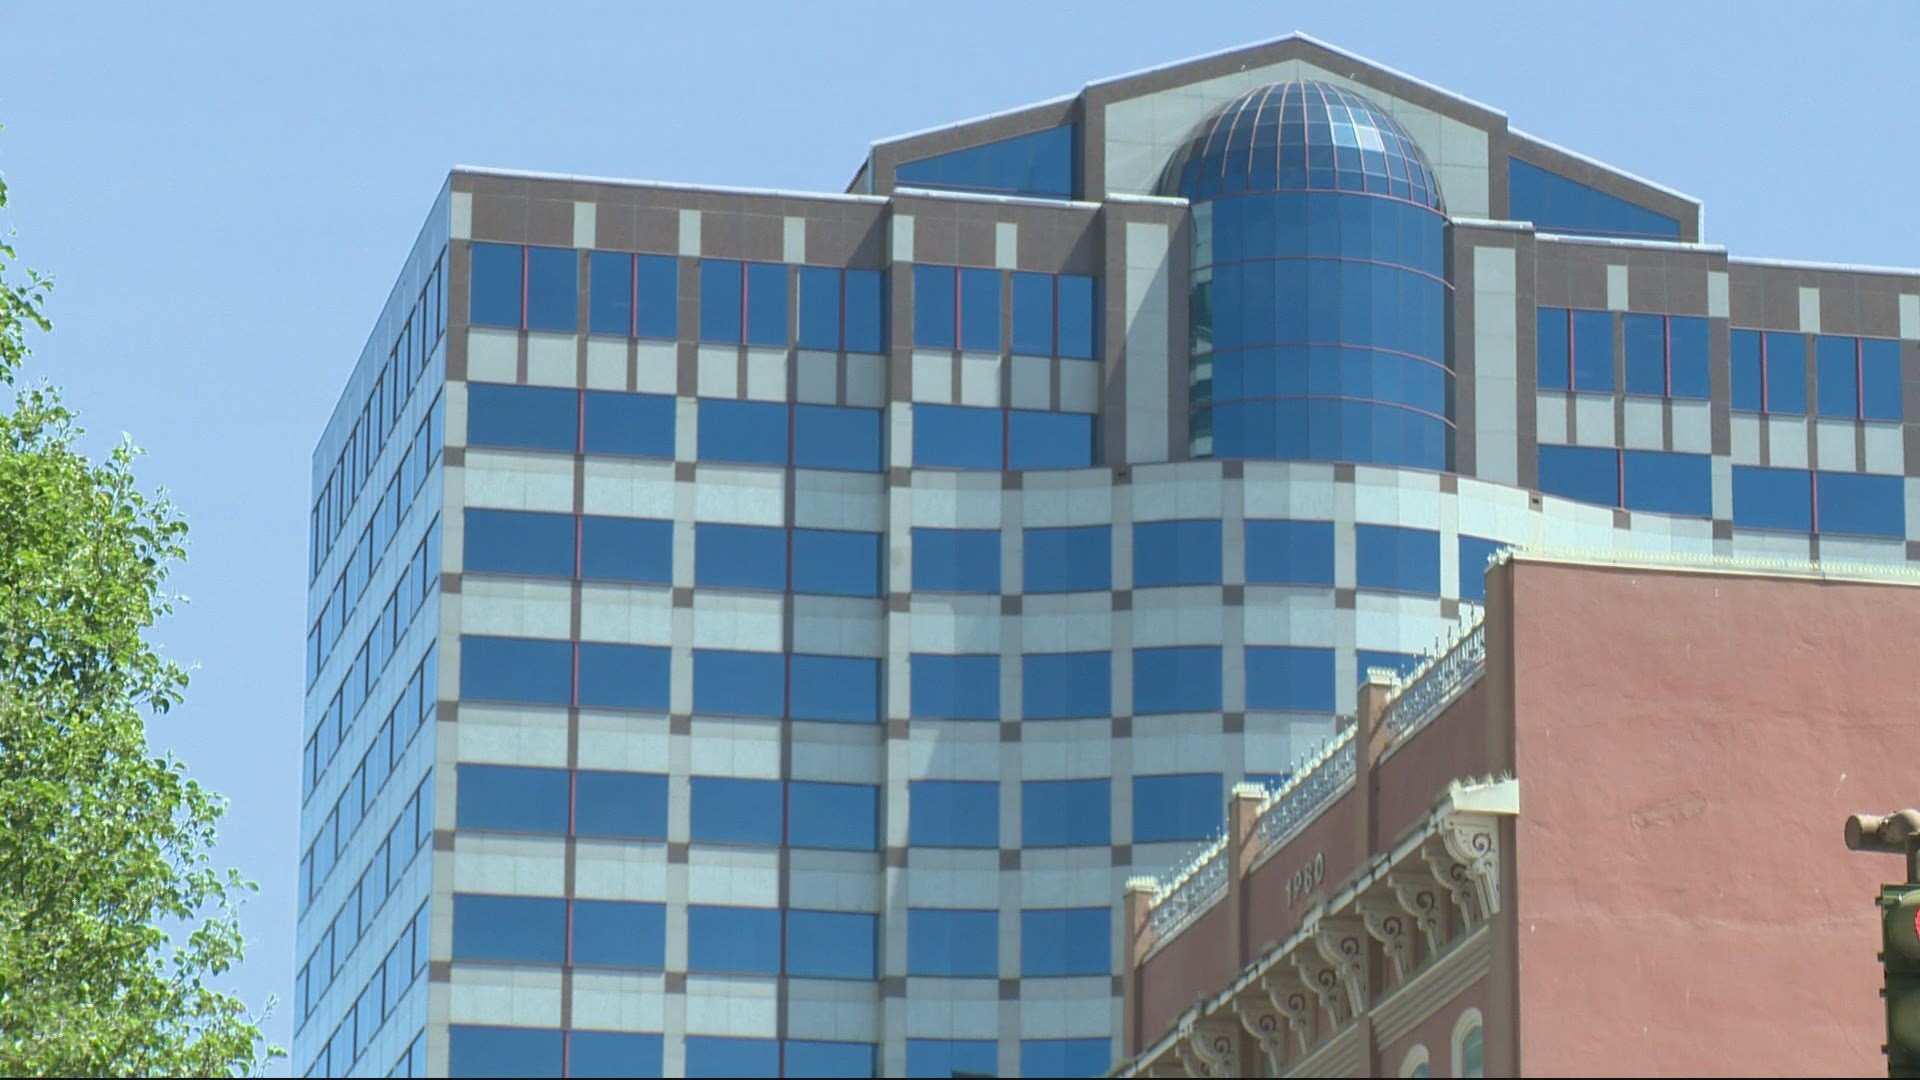 As Morgan Romero reports, some of the city’s biggest employers in downtown Portland plan to welcome employees into their buildings by fall.